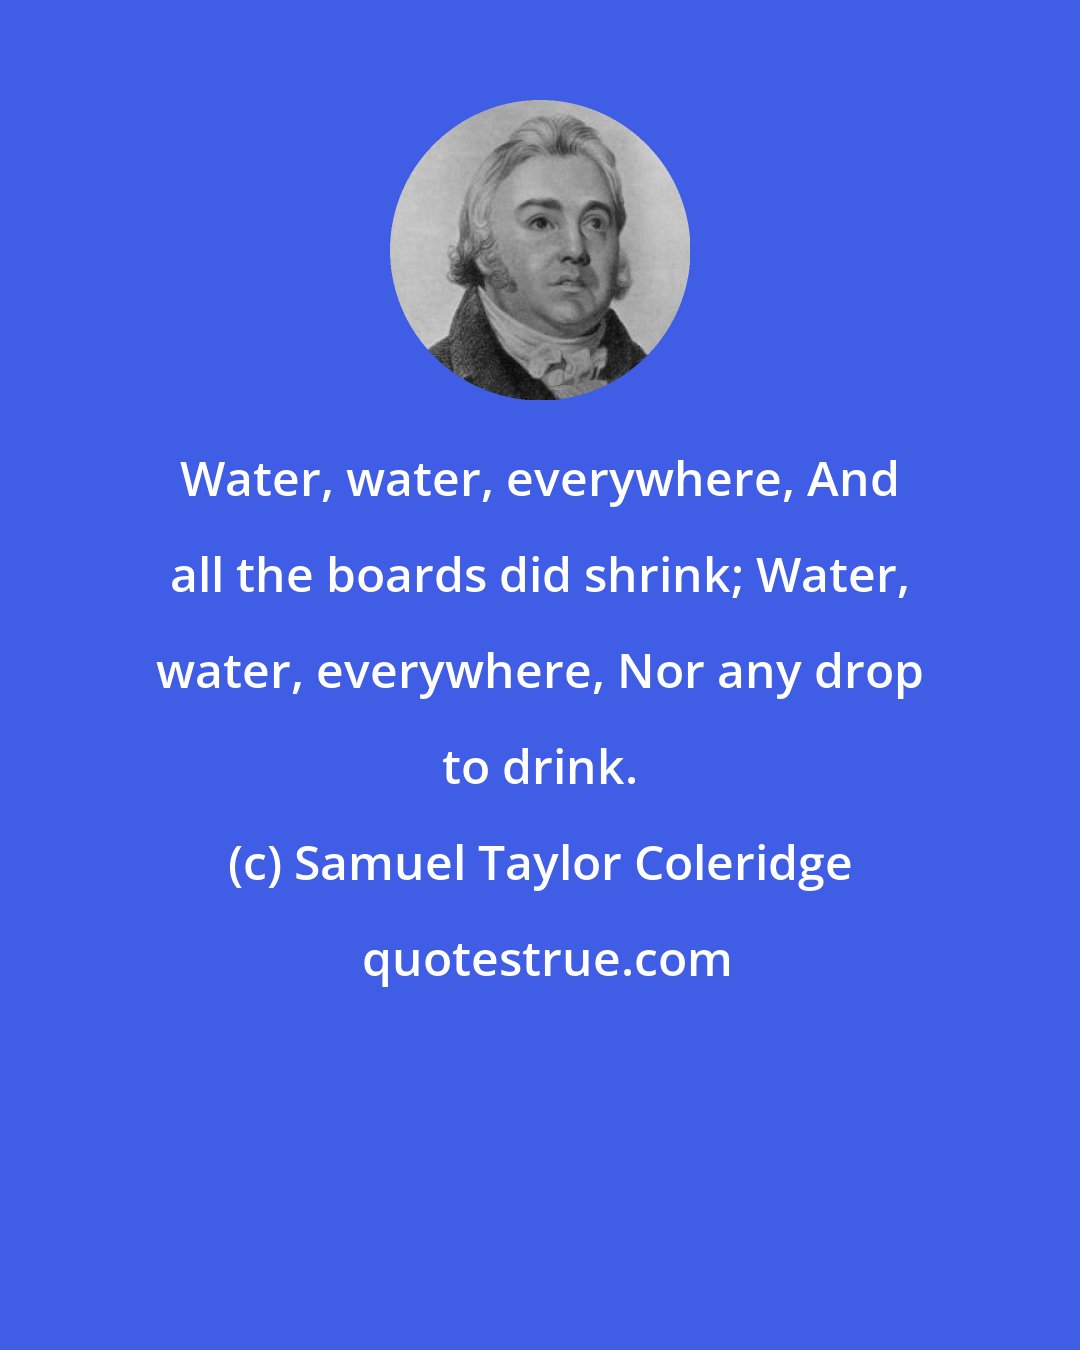 Samuel Taylor Coleridge: Water, water, everywhere, And all the boards did shrink; Water, water, everywhere, Nor any drop to drink.